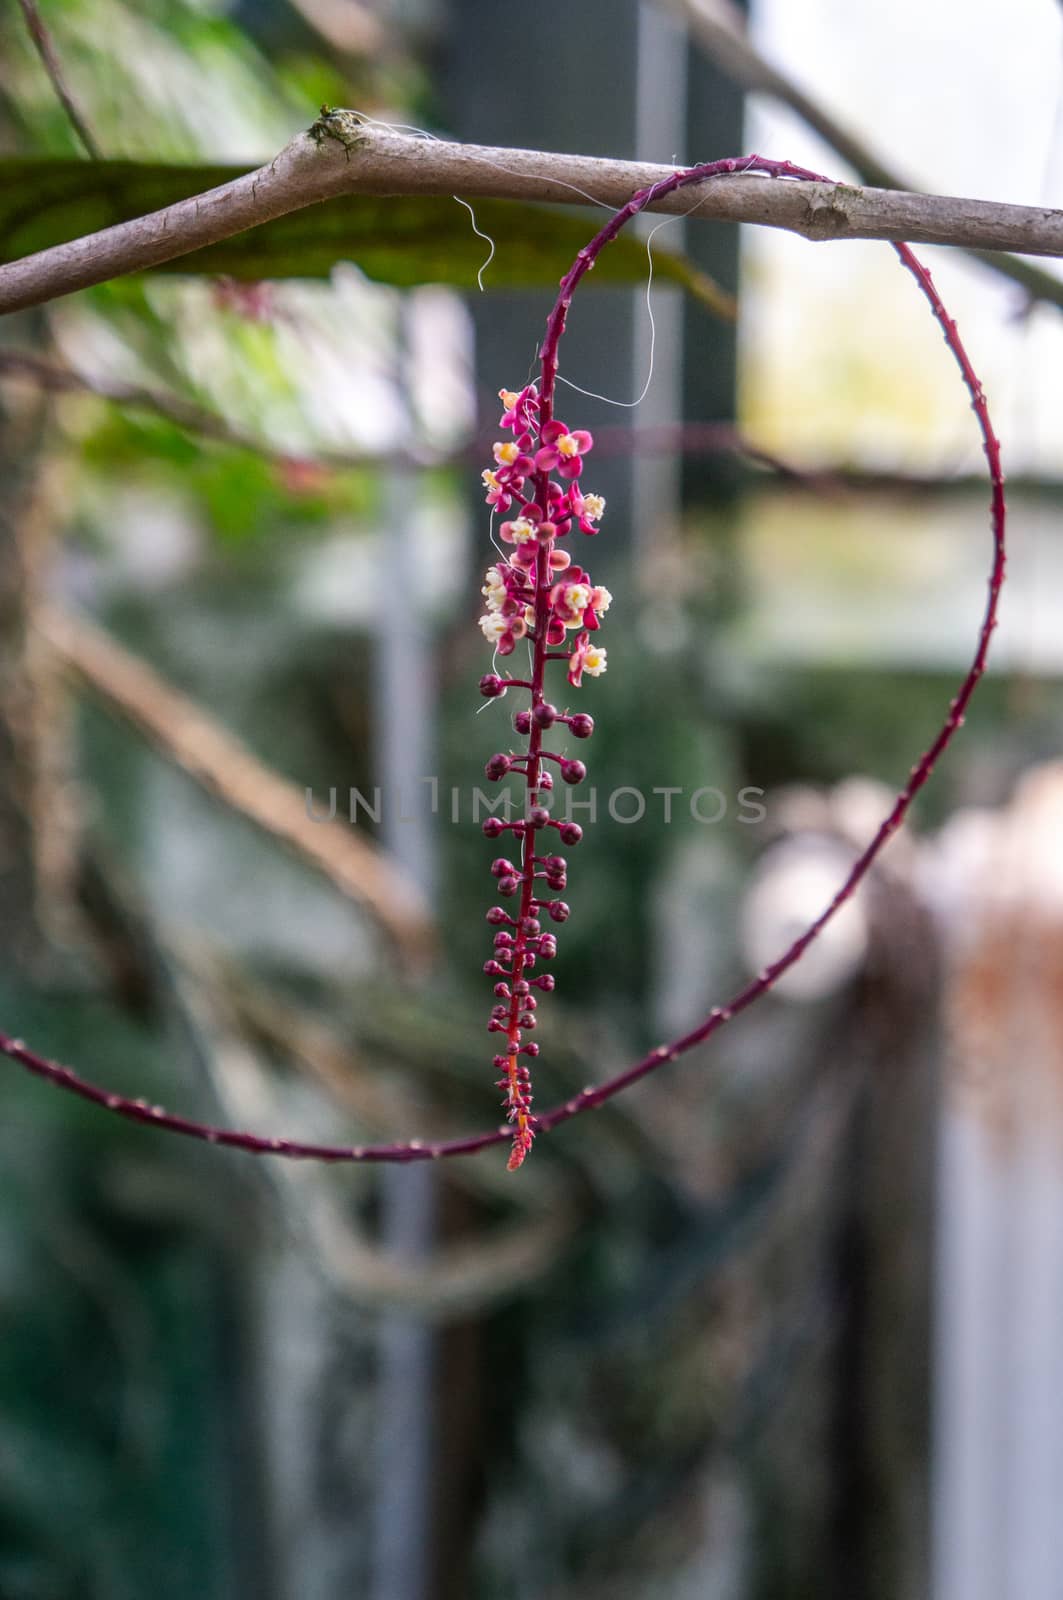 Macro shot of dark pink "Trichostigma peruviana" vine with small flowers on tropical background. Vine wrapped around branch shot in natural sunlight.